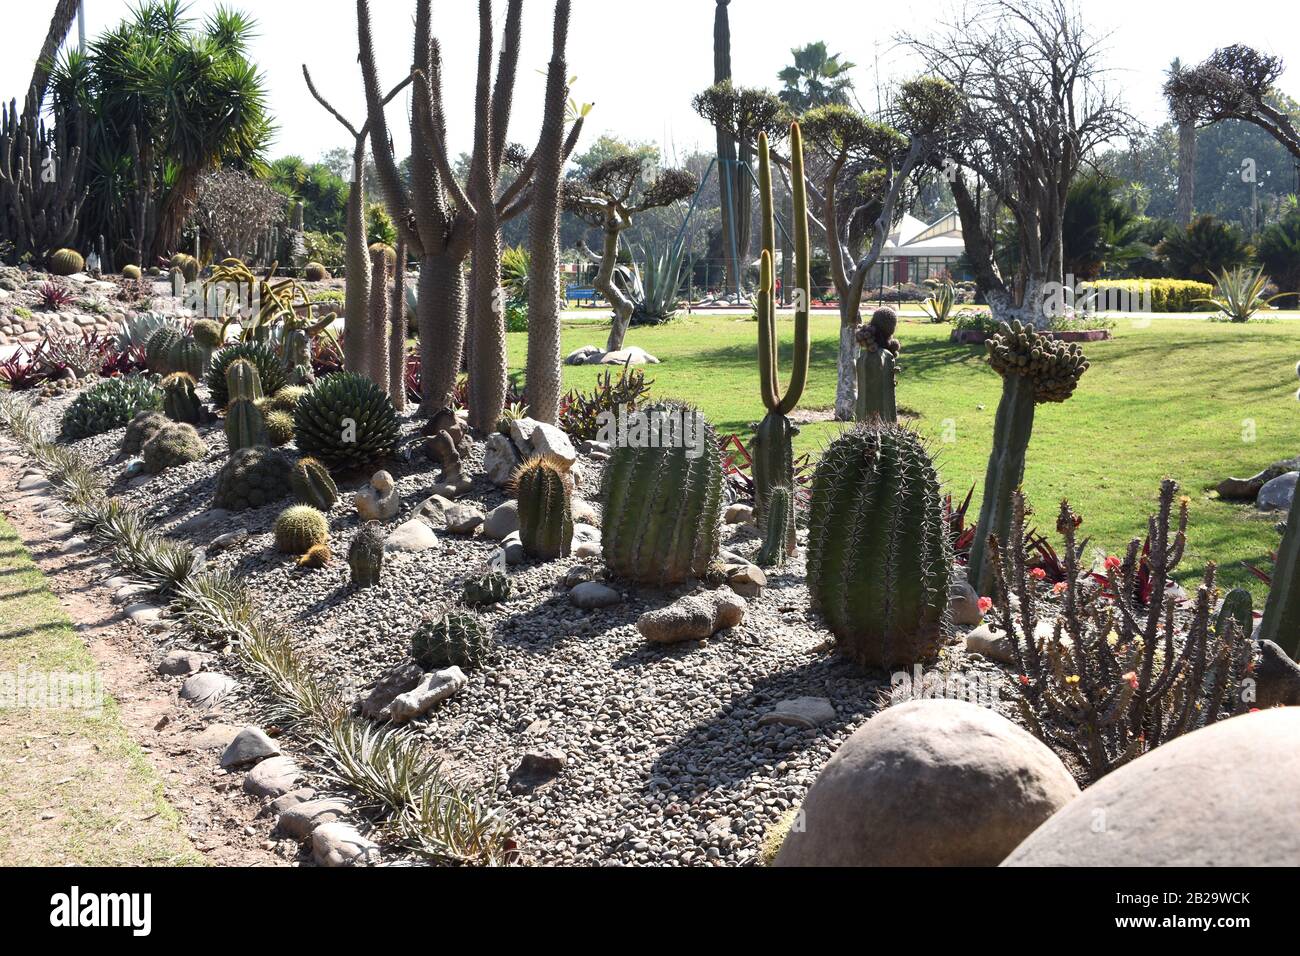 View of Twisted Barrel Cacti and Adenium shrubs at a Cactus Garden. Stock Photo